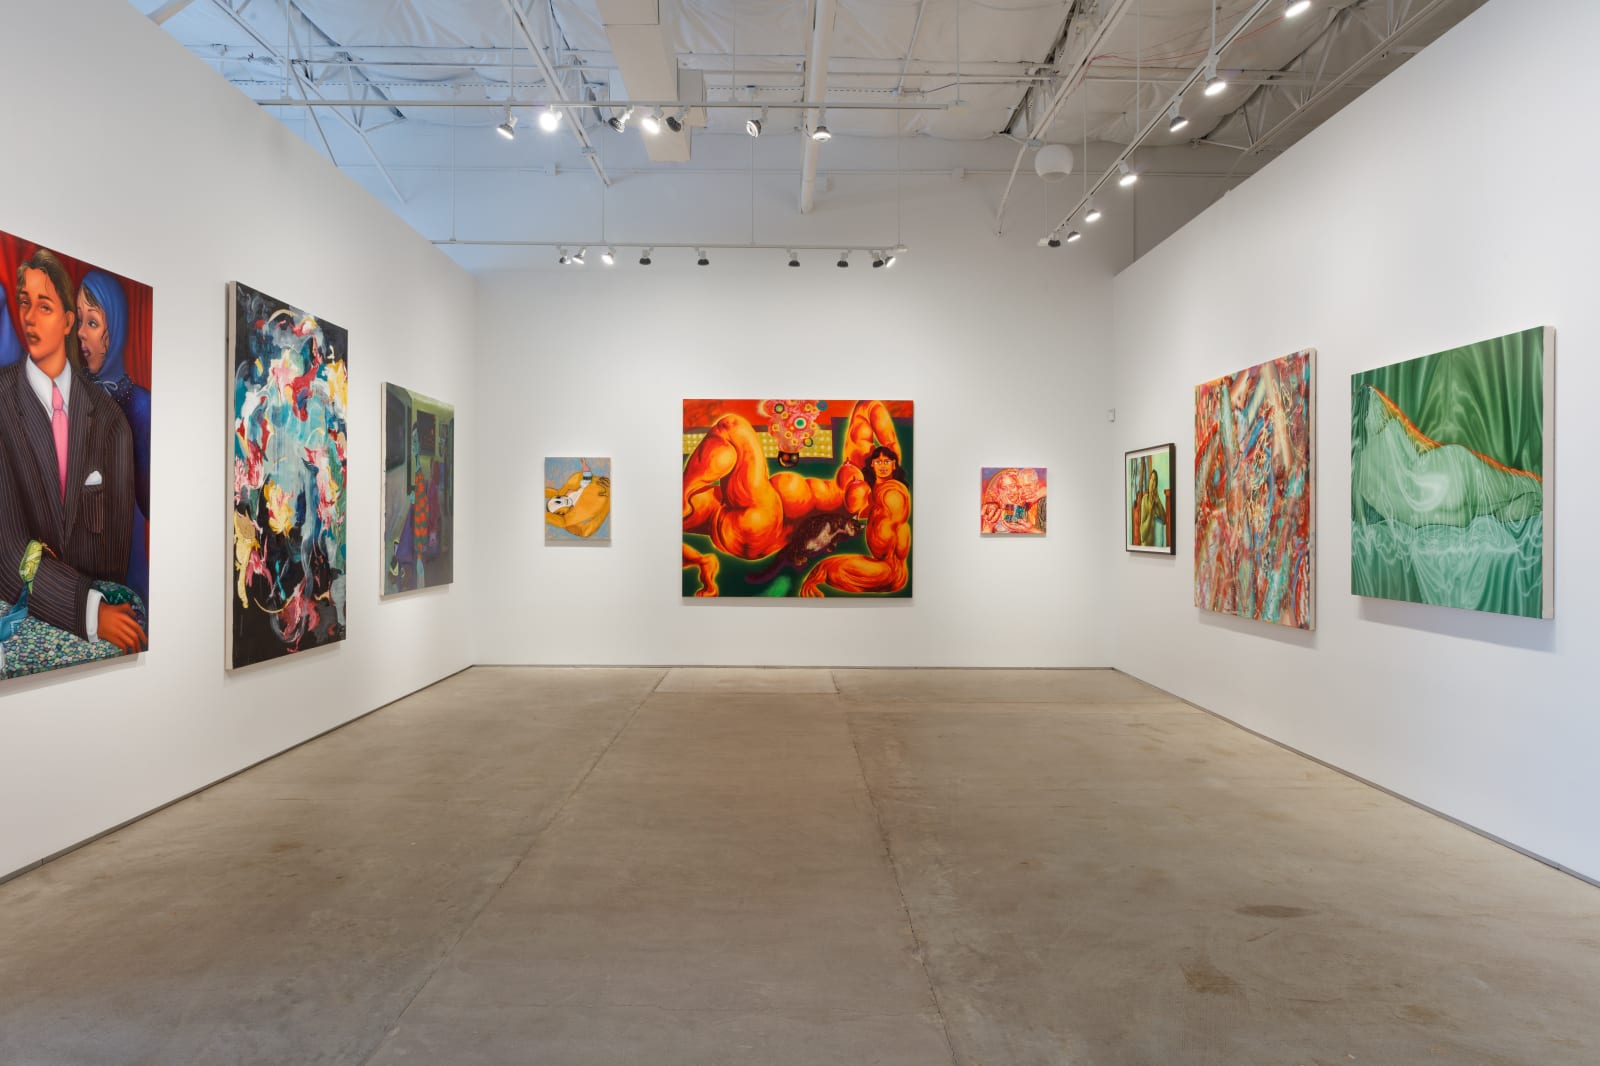 Installation view, Women of Now: Dialogues of Memory, Place & Identity, 2022. Todora Photography.